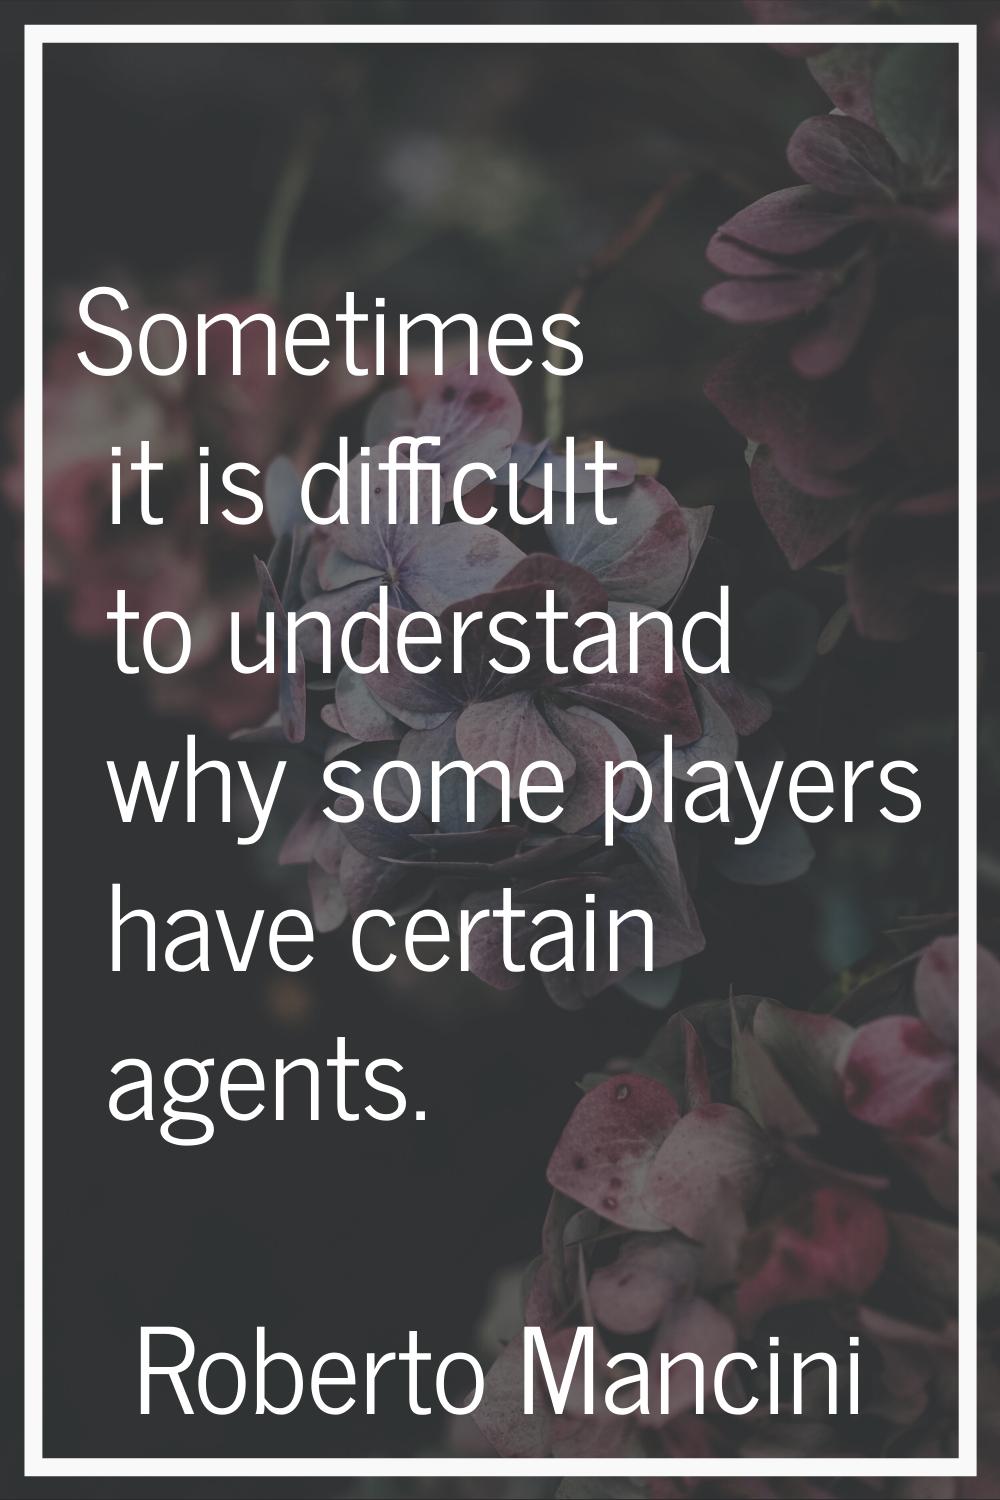 Sometimes it is difficult to understand why some players have certain agents.